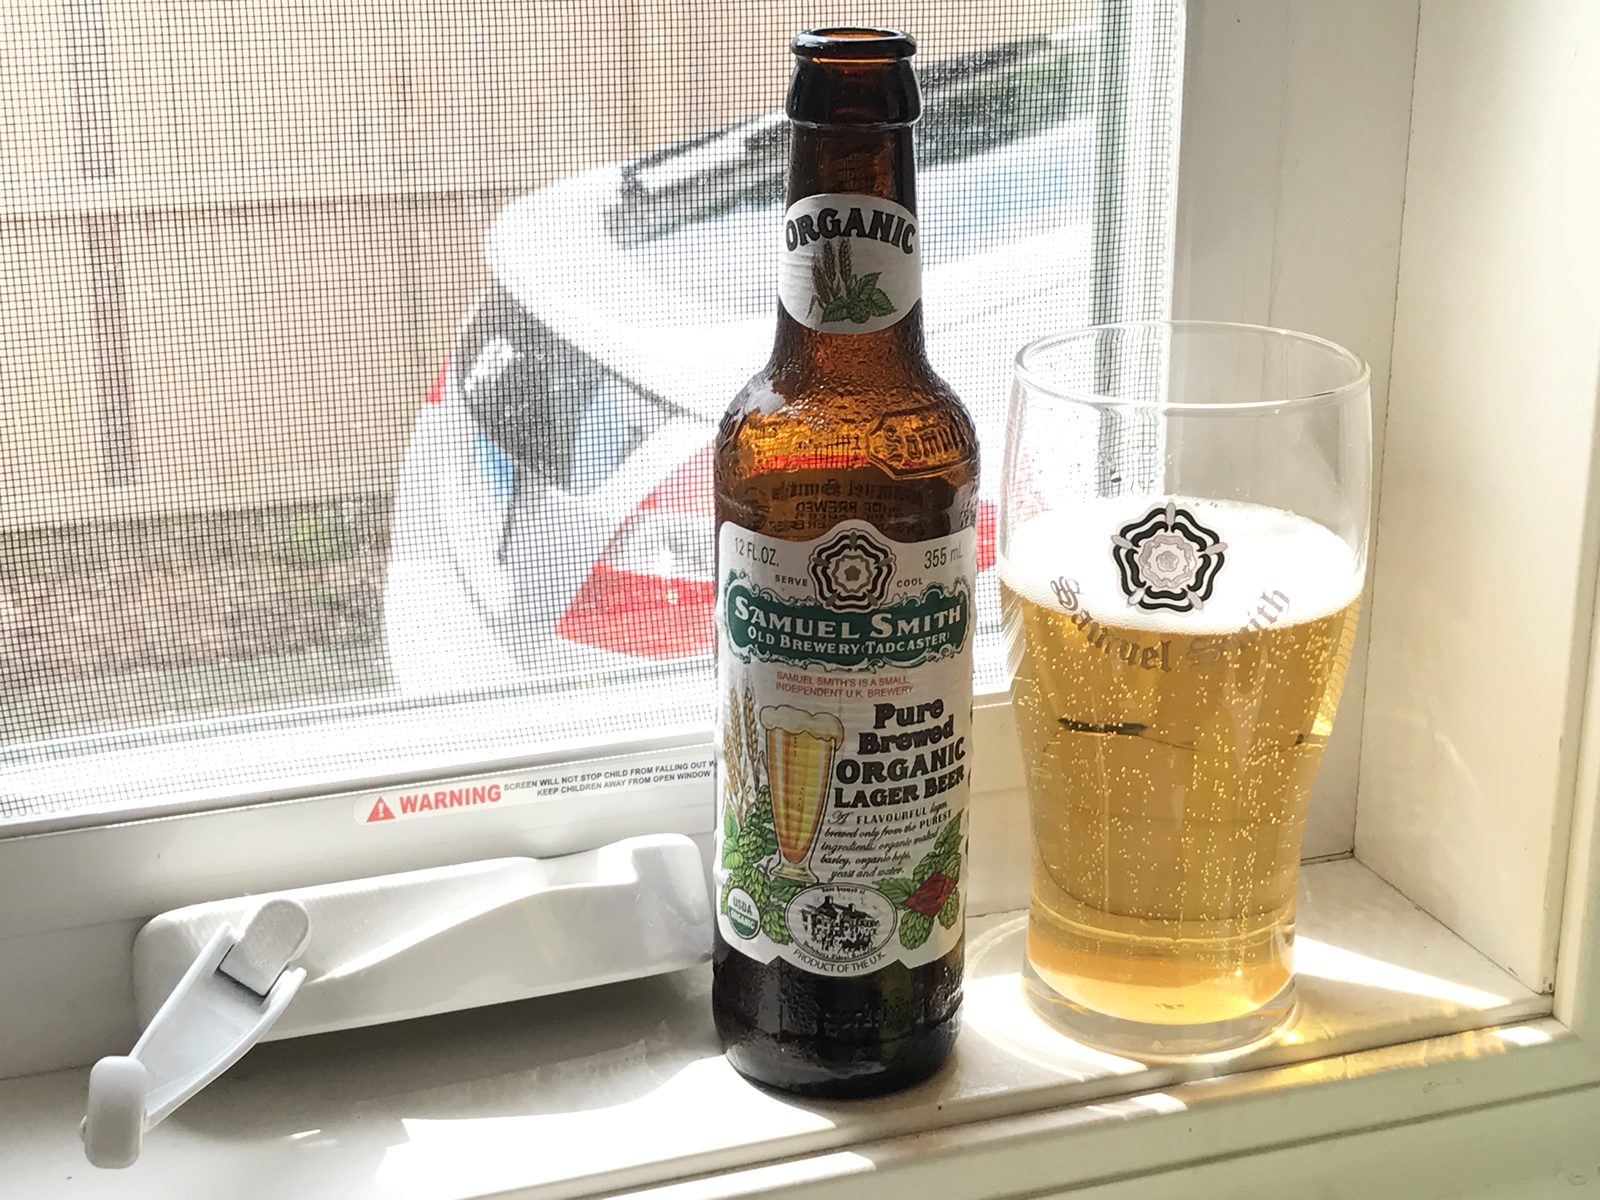 Samuel Smith's Old Brewery: Pure Brewed Organic Lager